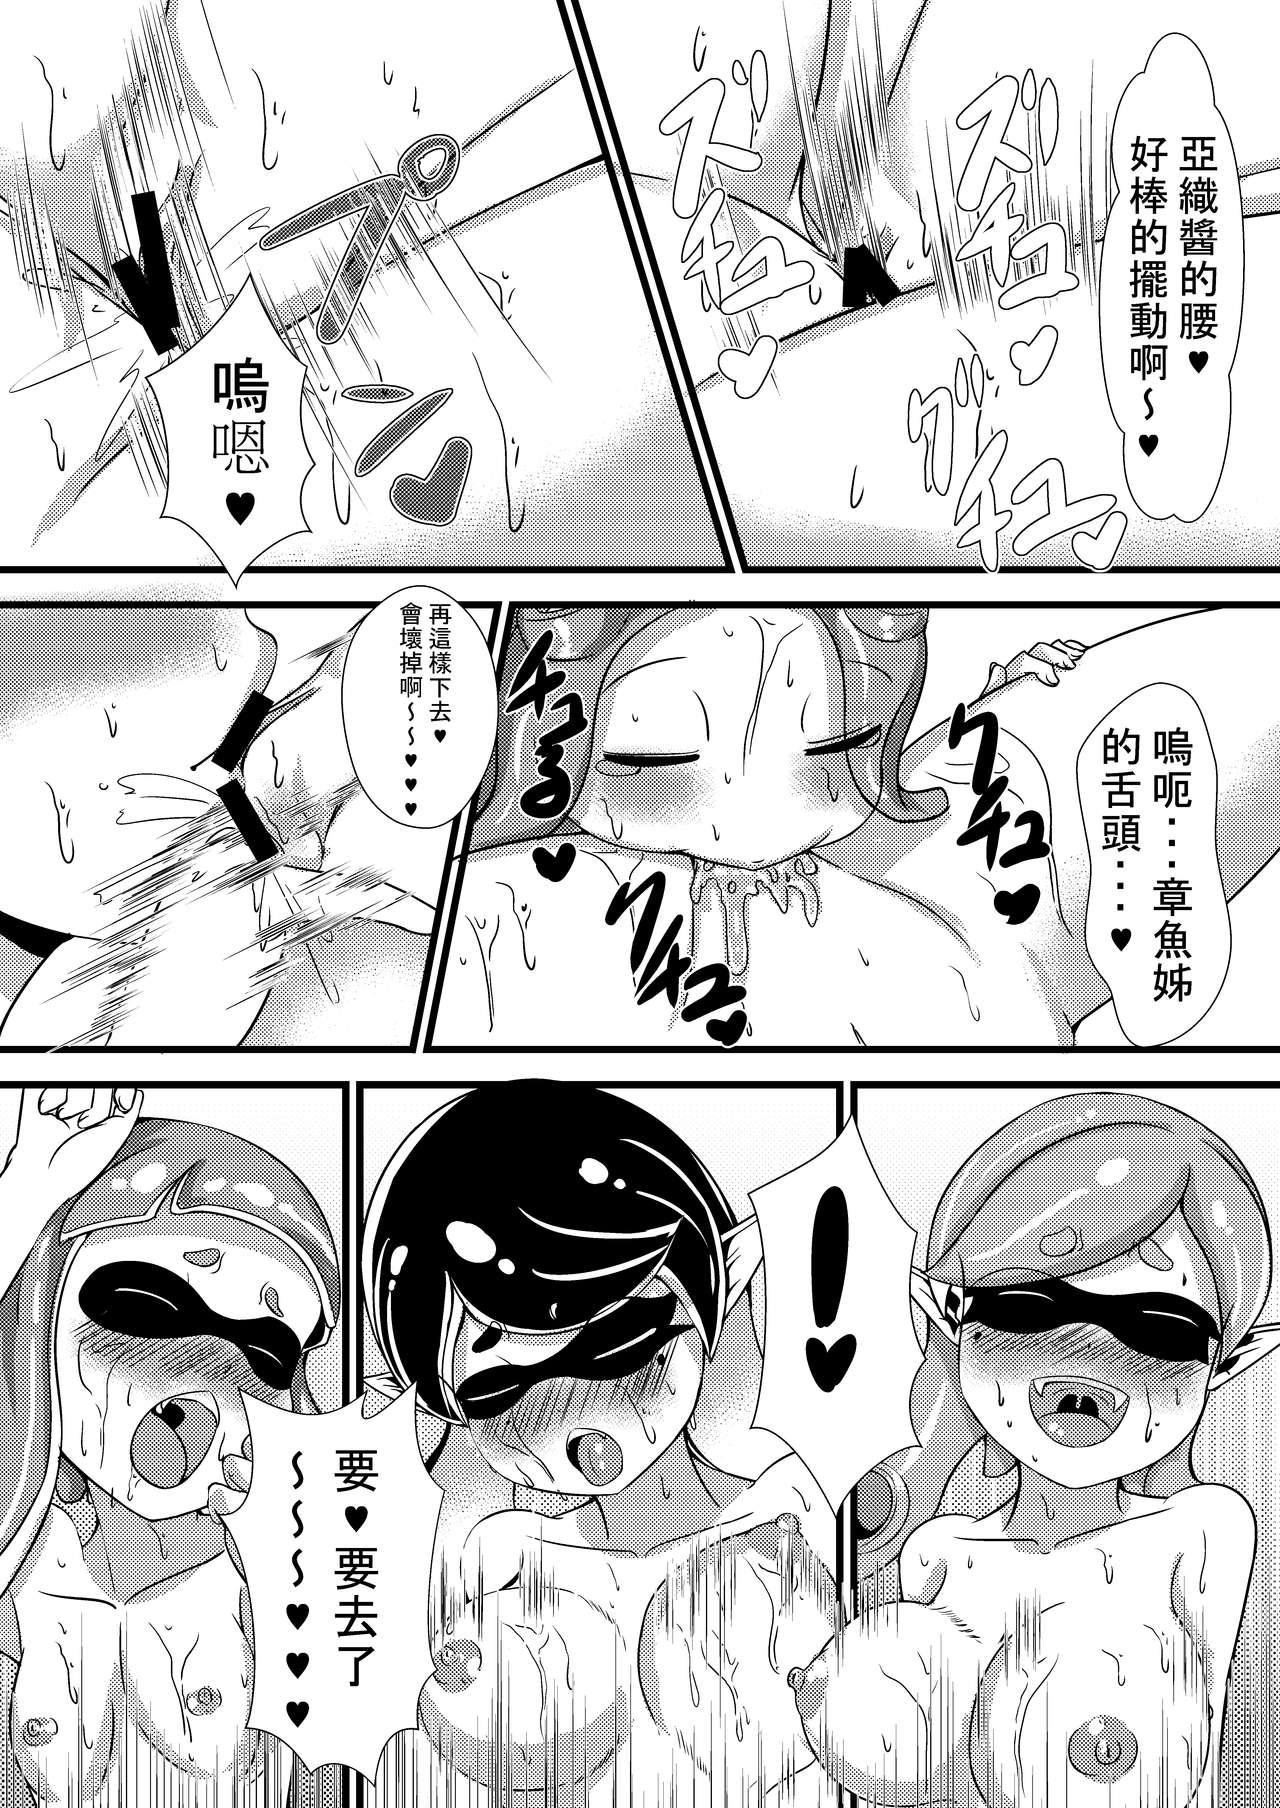 Shemales Spring inkling - Splatoon Soapy Massage - Page 11